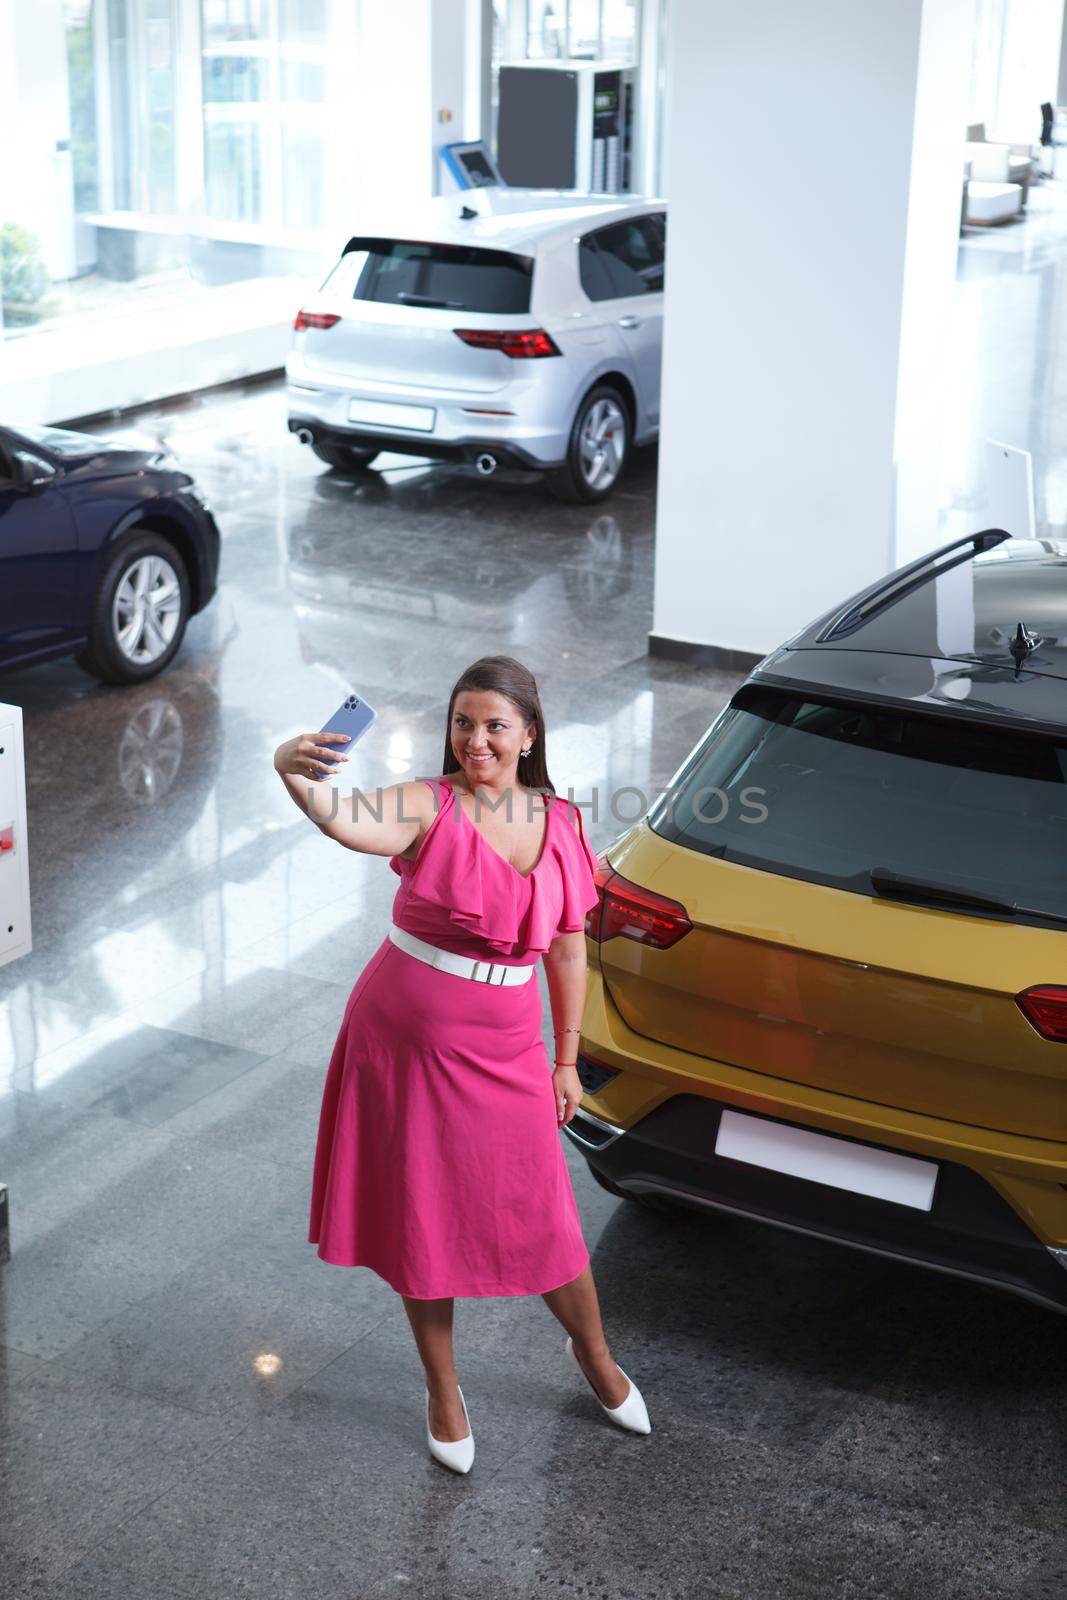 Vertical top view shot of a woman taking selfies with smart phone at car dealership